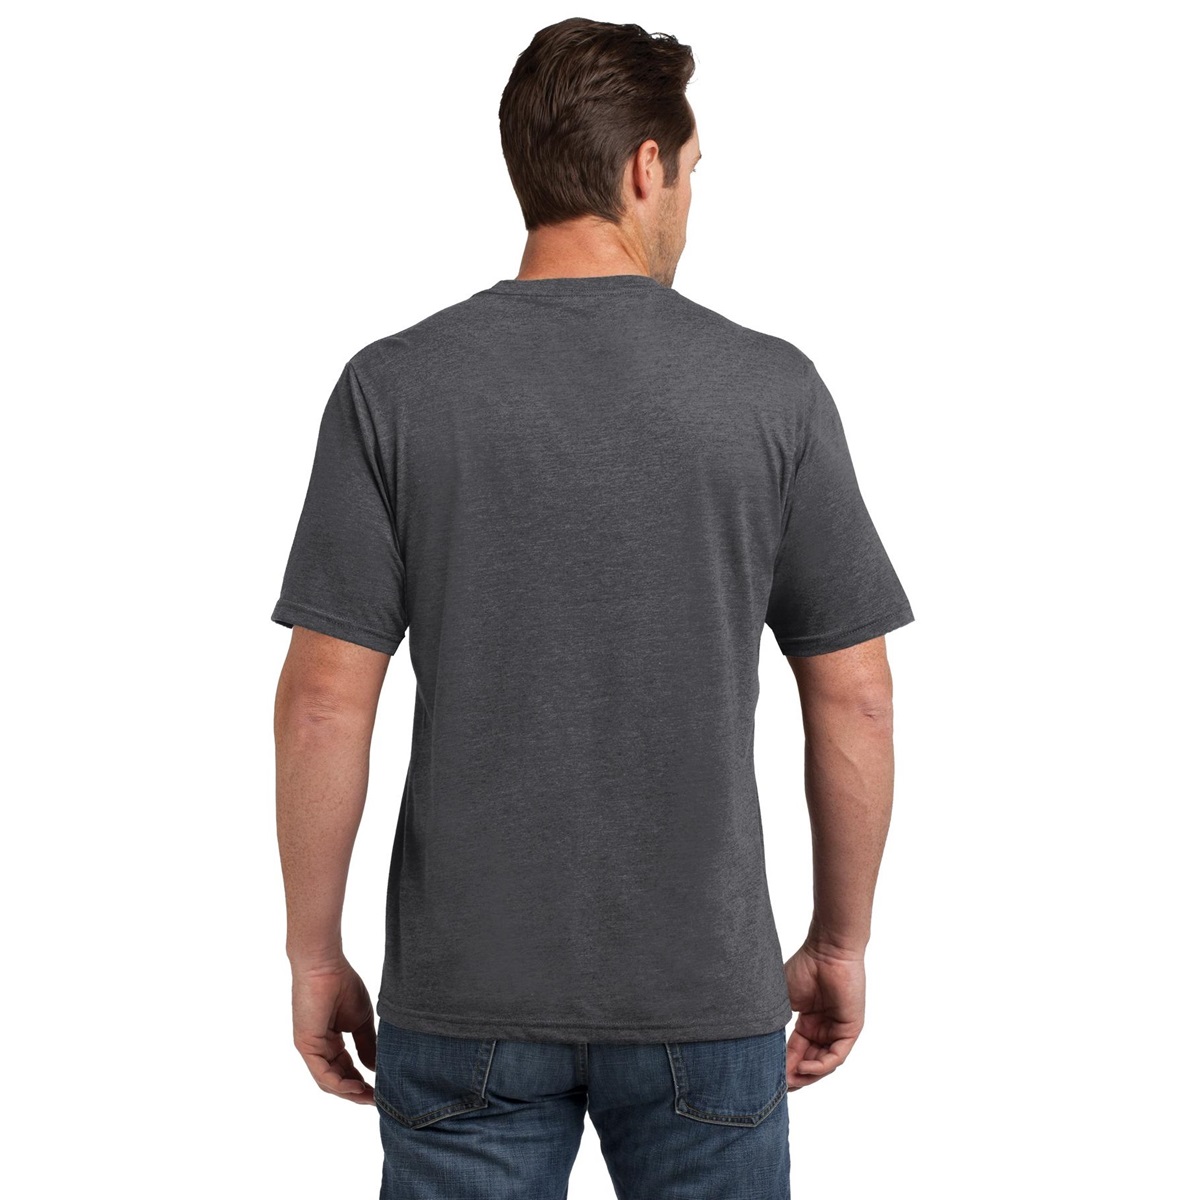 District Made DM108 Mens Perfect Blend Crew Tee - Heathered Charcoal ...